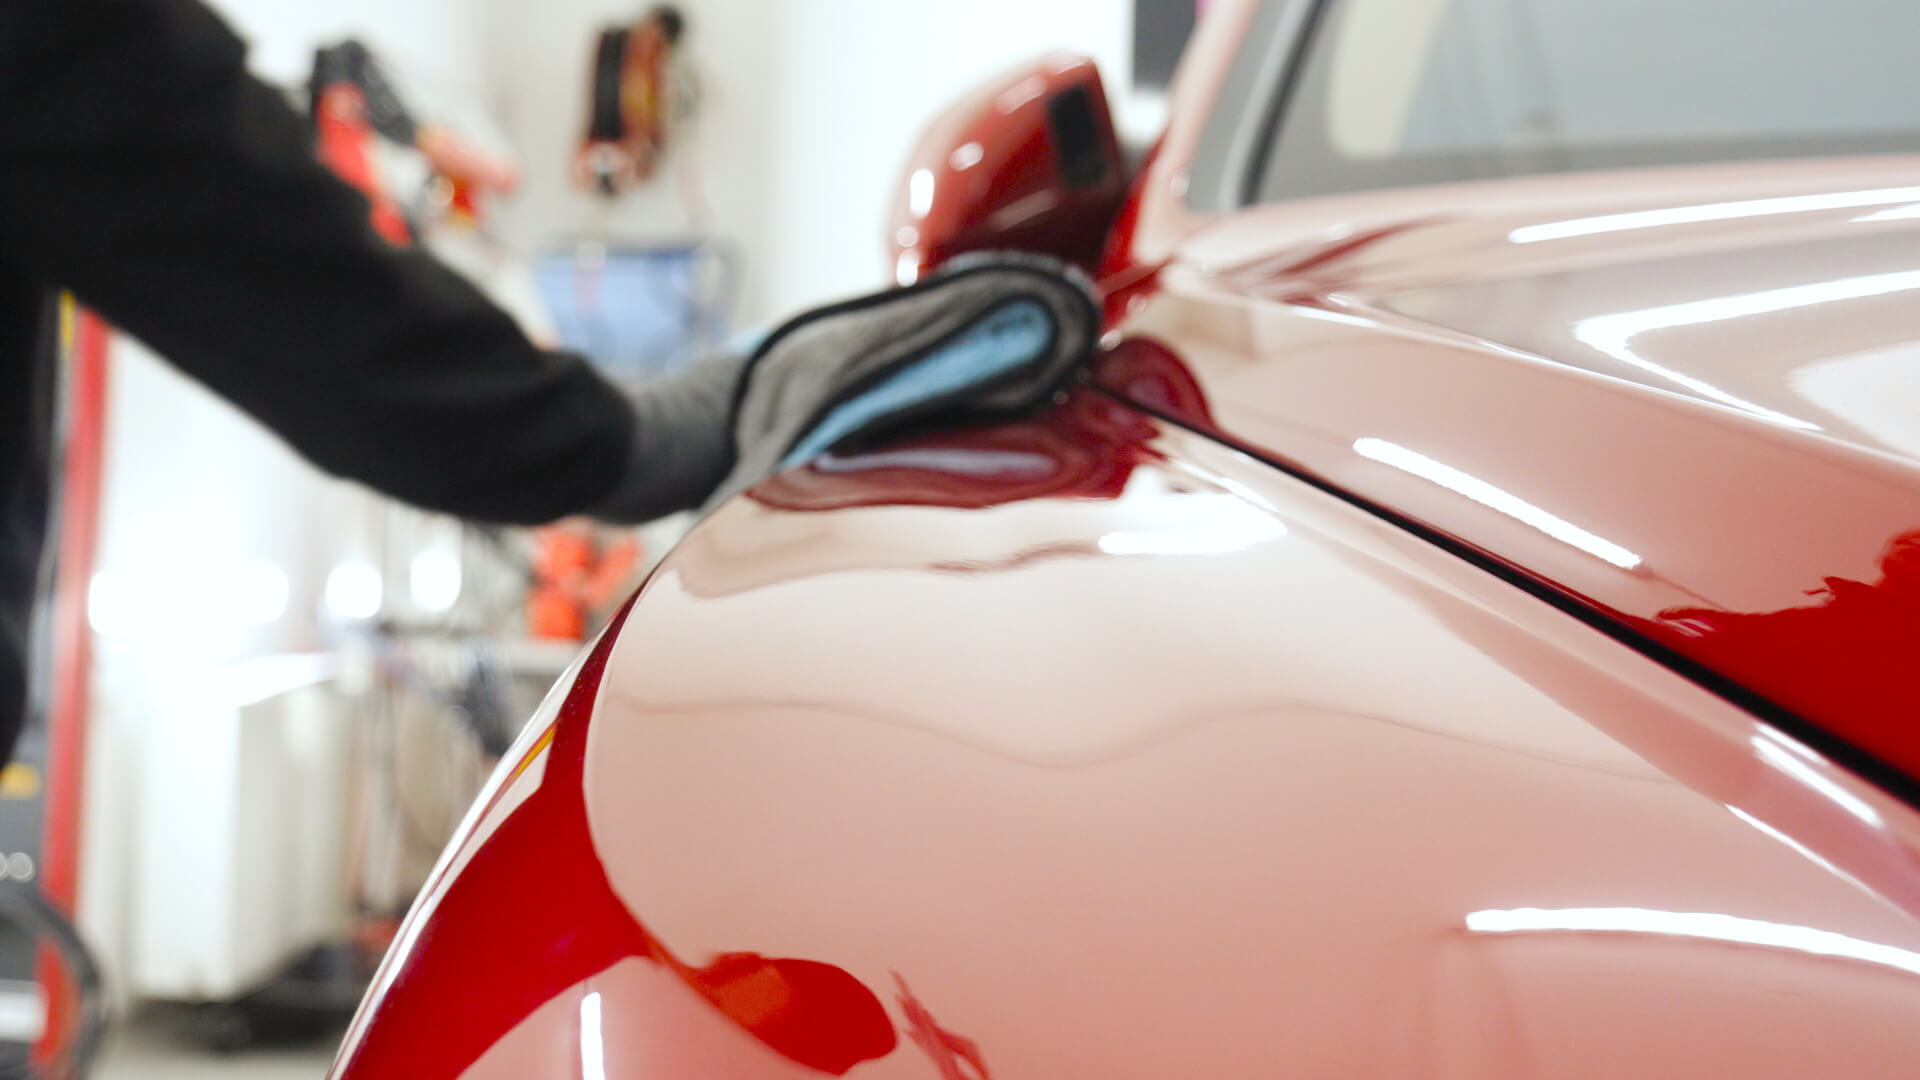 shiny red car being polished